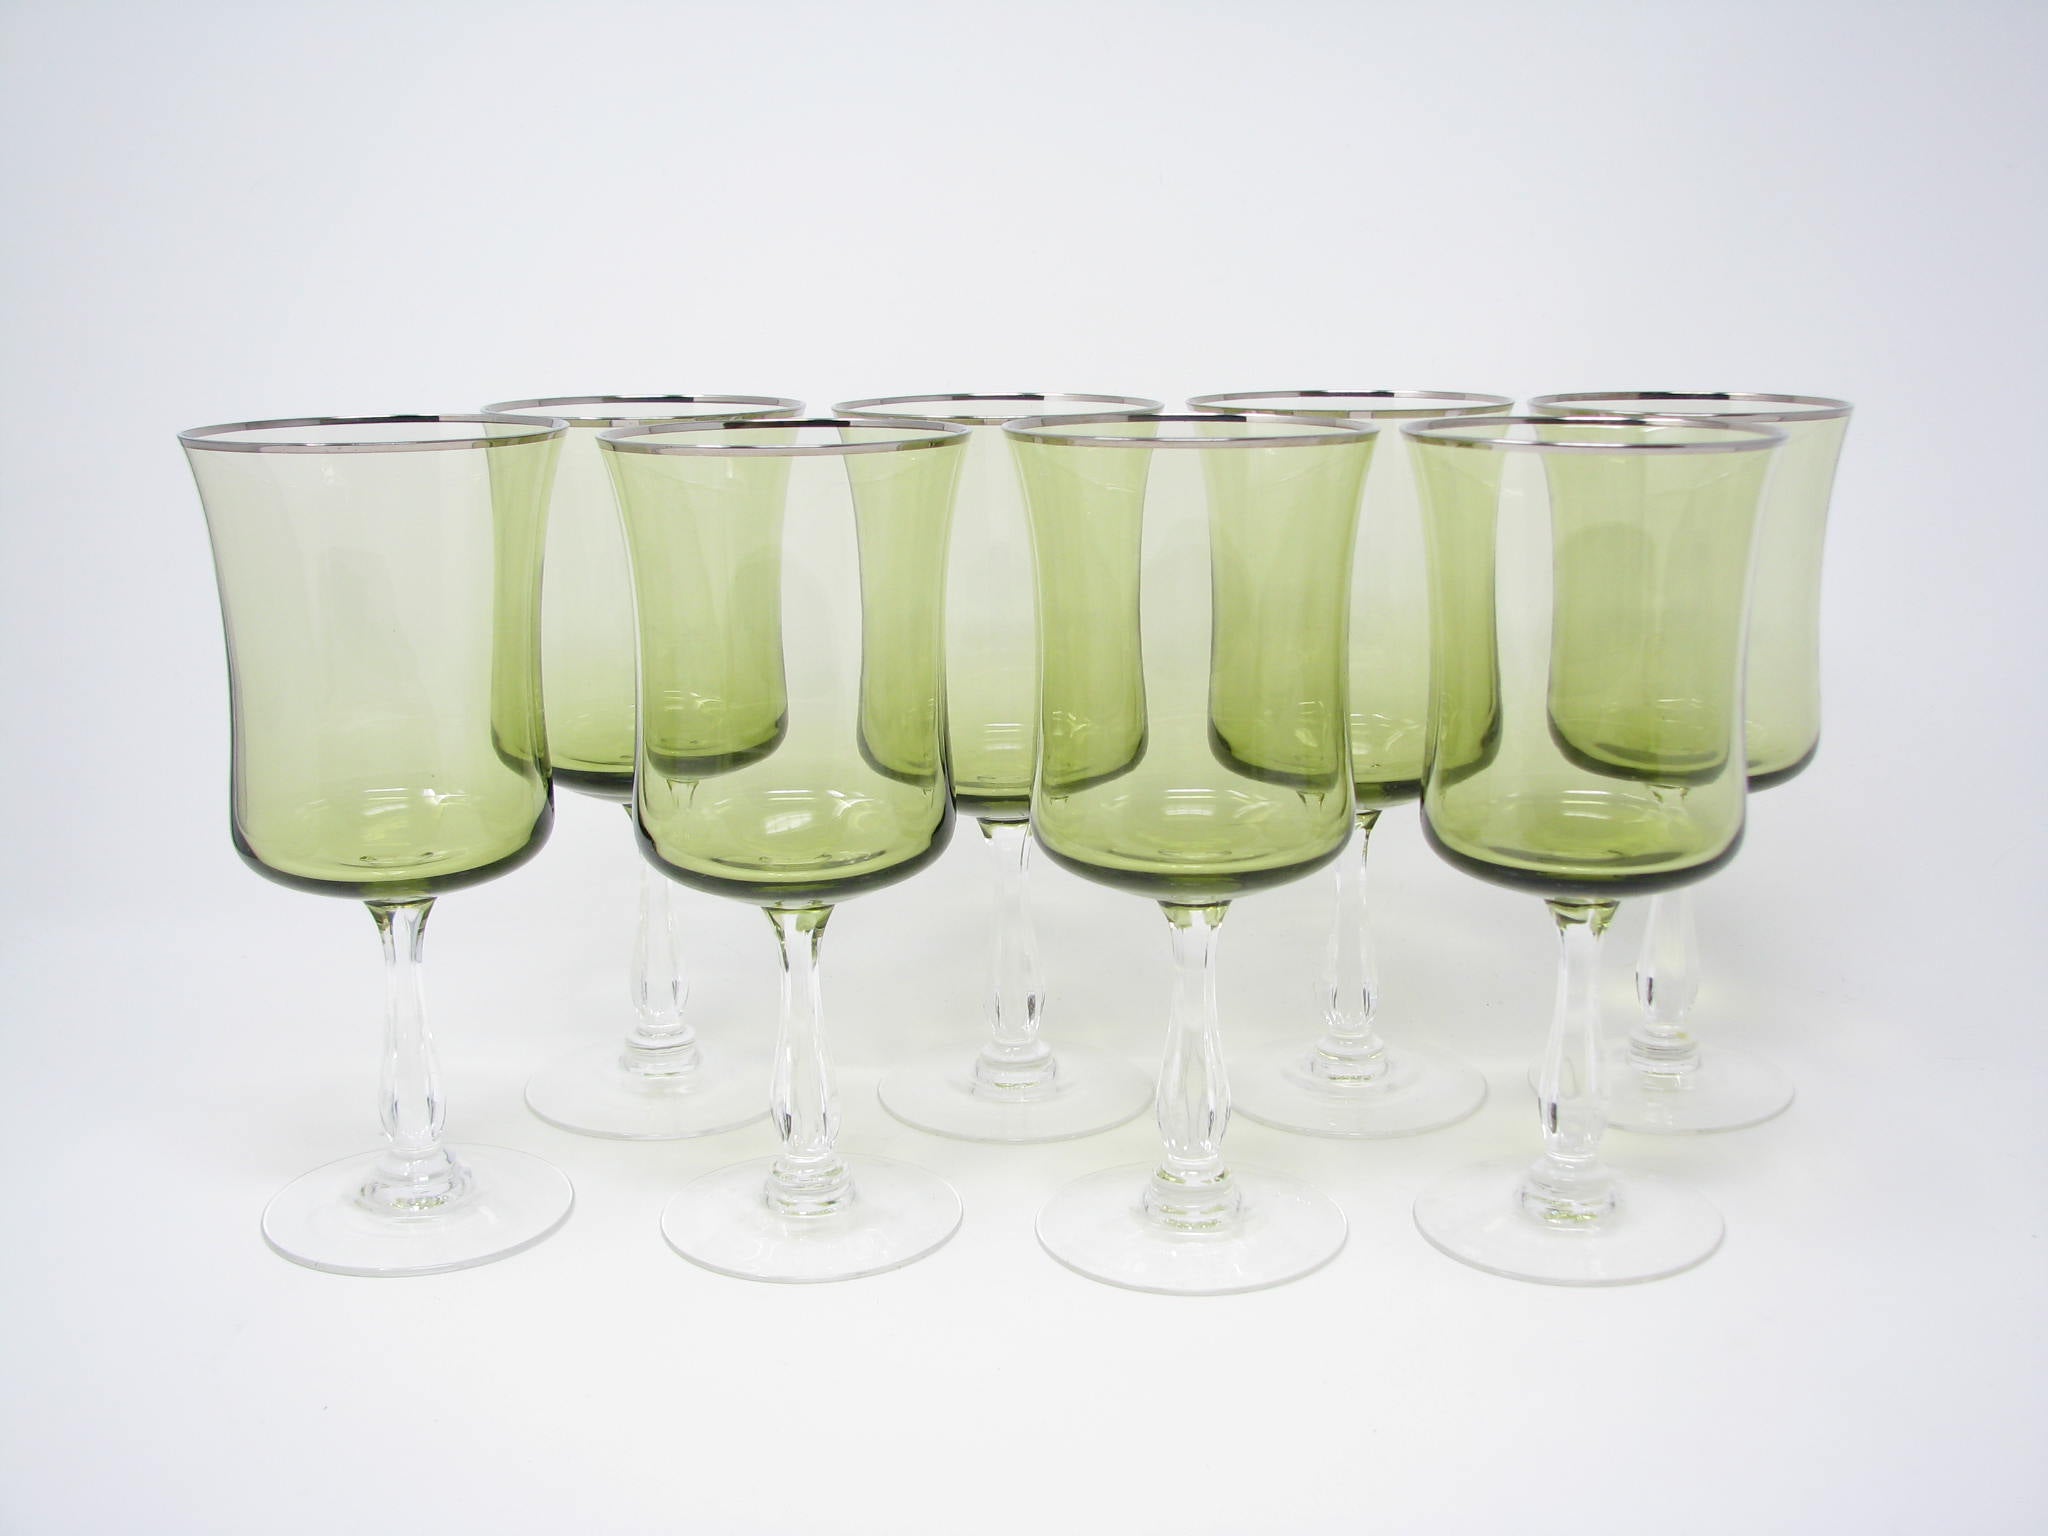 edgebrookhouse - Vintage Noritake Rainbow Green Wine Glasses or Water Goblets with Platinum Trim - 8 Pieces